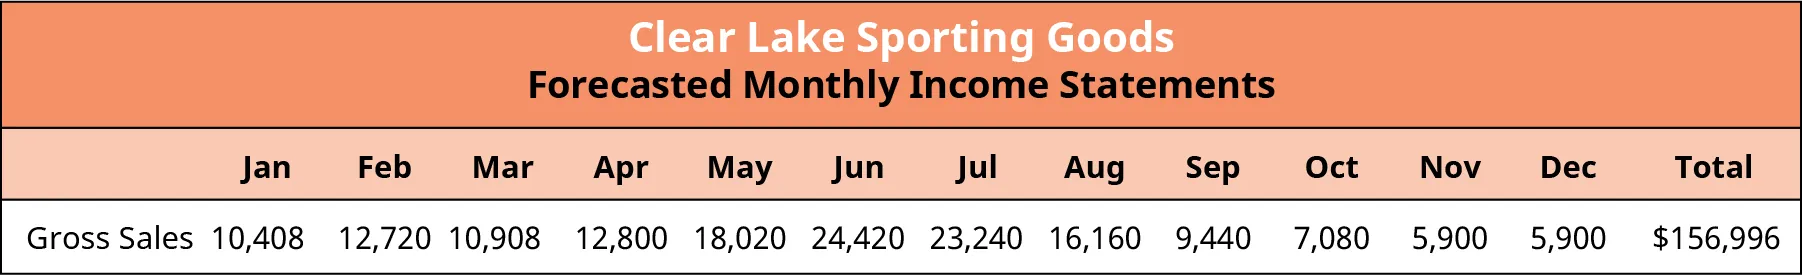 The Forecasted Monthly Income Statement for Clear Lake Sporting Goods with the forecast adjusted to account for the new brand that will be introduced. Starting in March through August, the monthly sales data is increased based on a manager's estimated sales for the new brand.